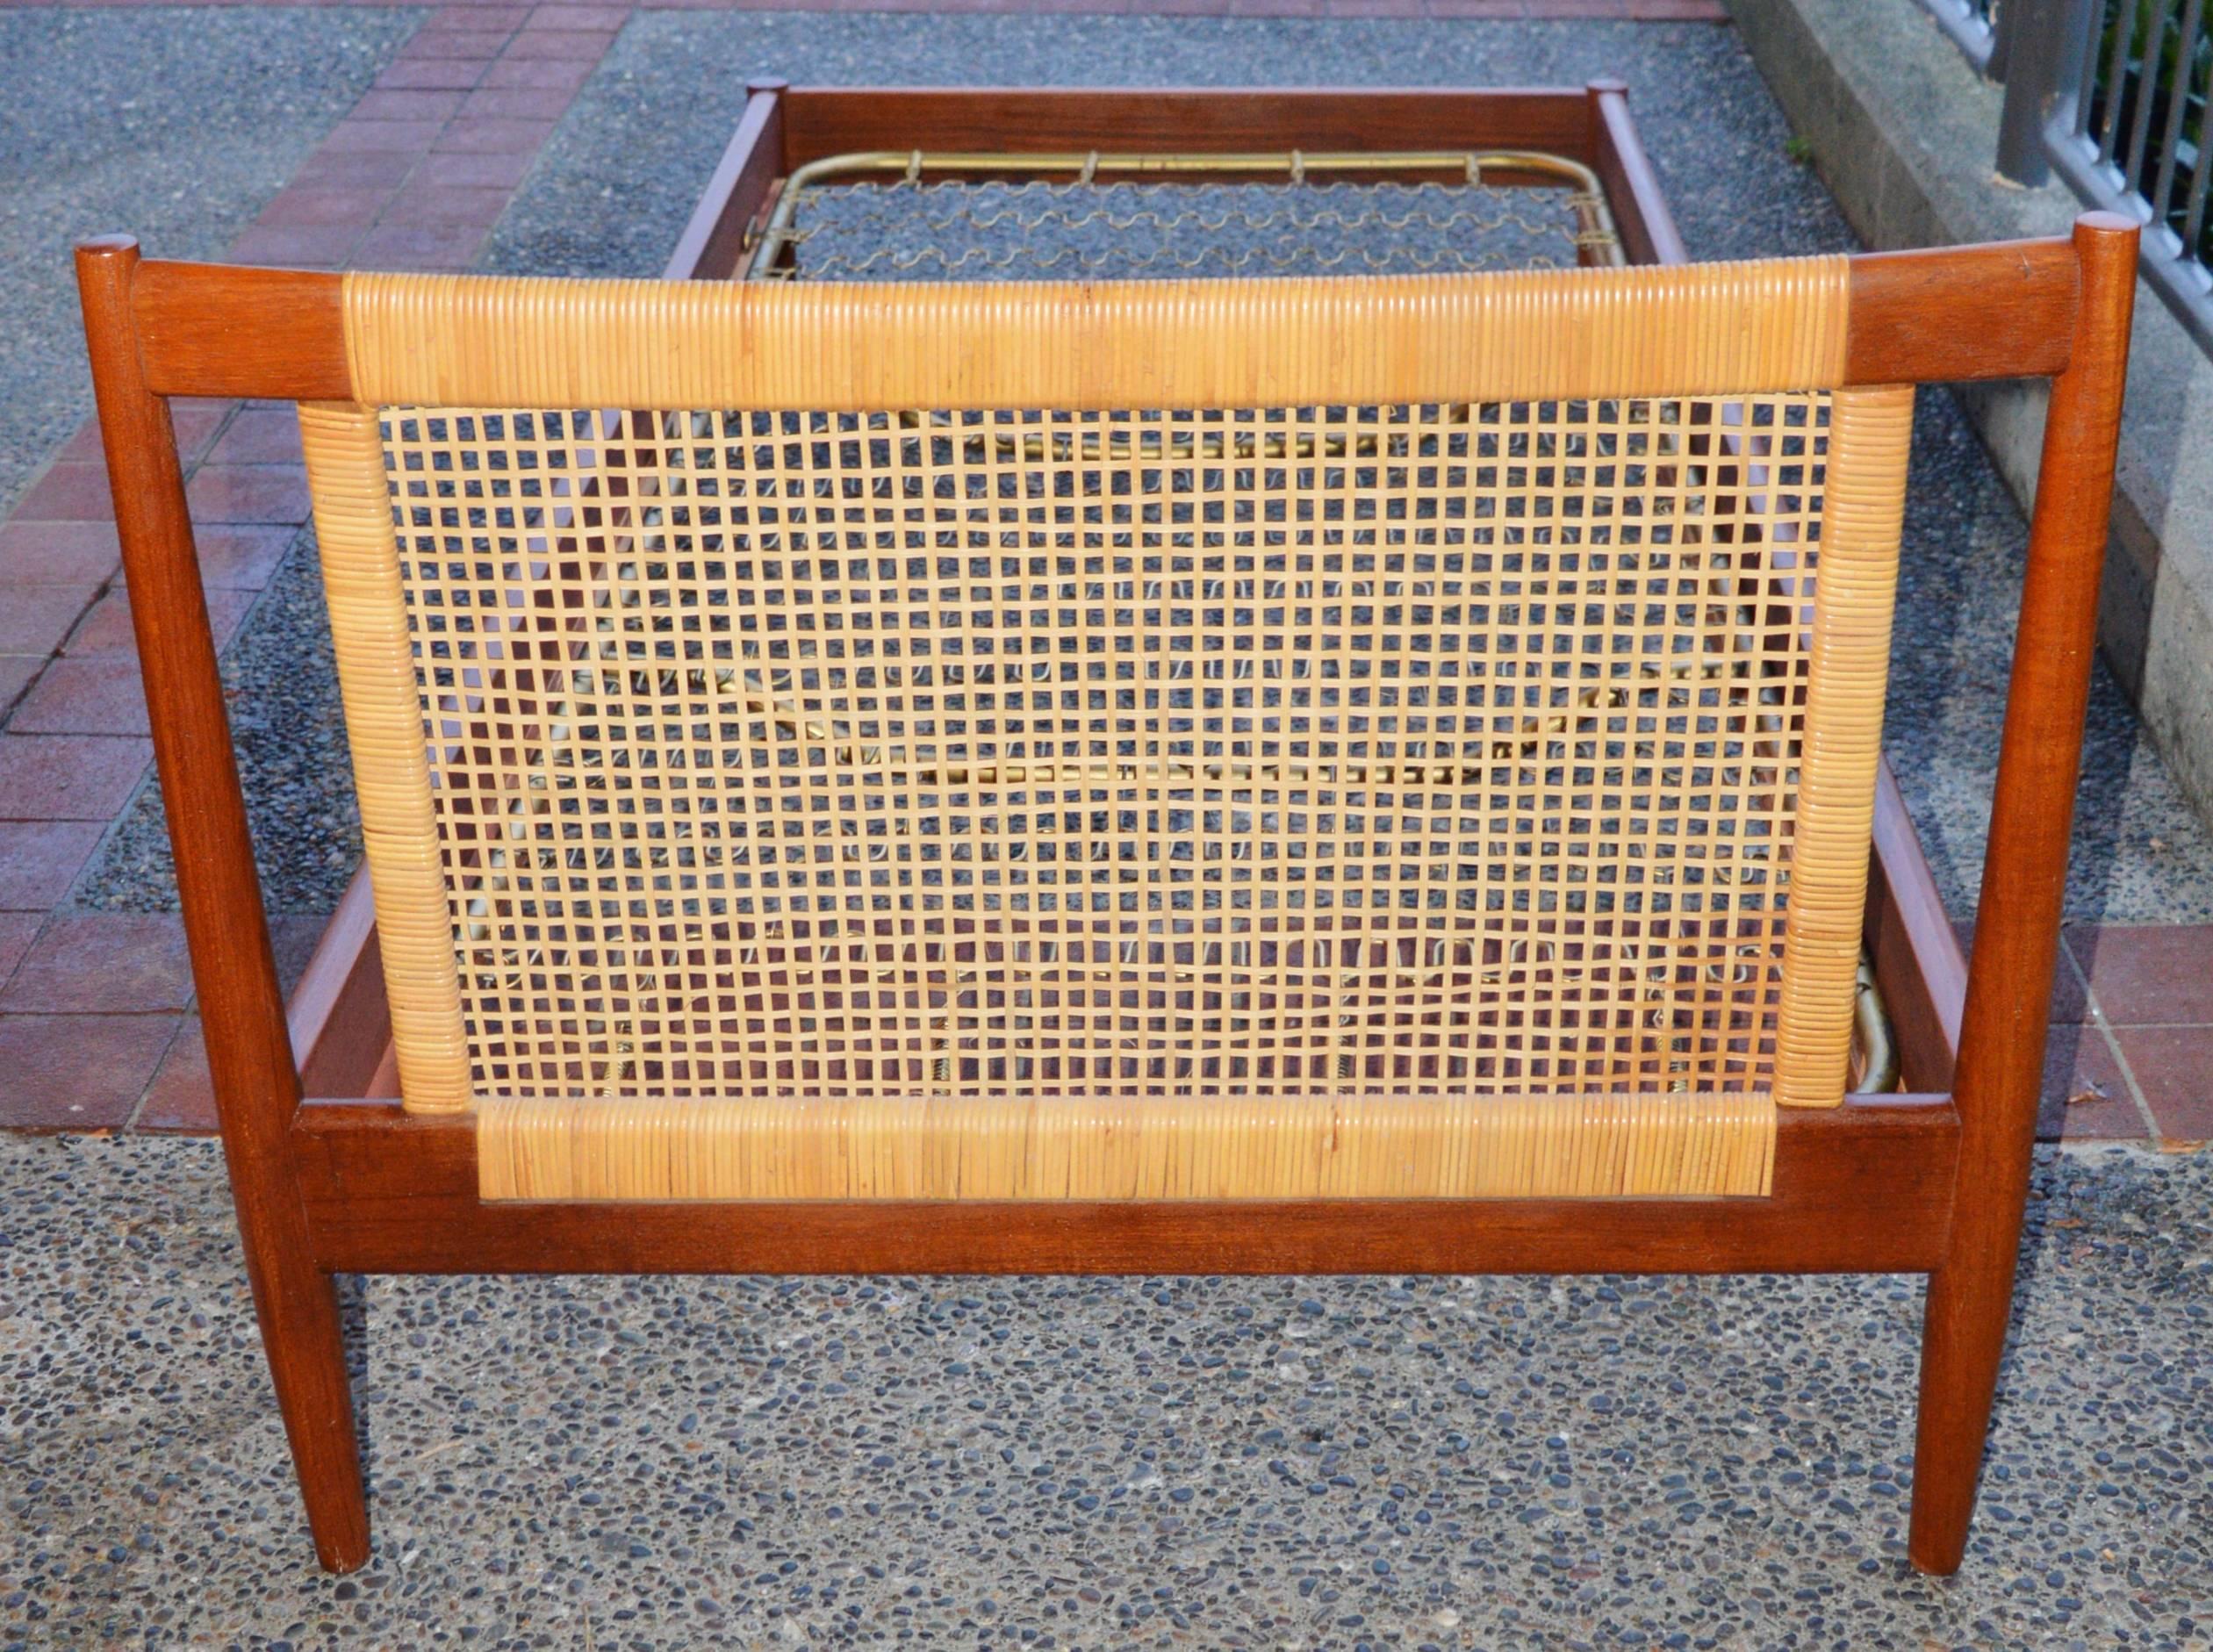 This lovely quality Danish modern teak twin or singled bedframe is gorgeous and beautifully constructed. The frame disassembles for convenient shipping and features a sculptural headboard with wrapped and basket woven caning. In excellent condition,